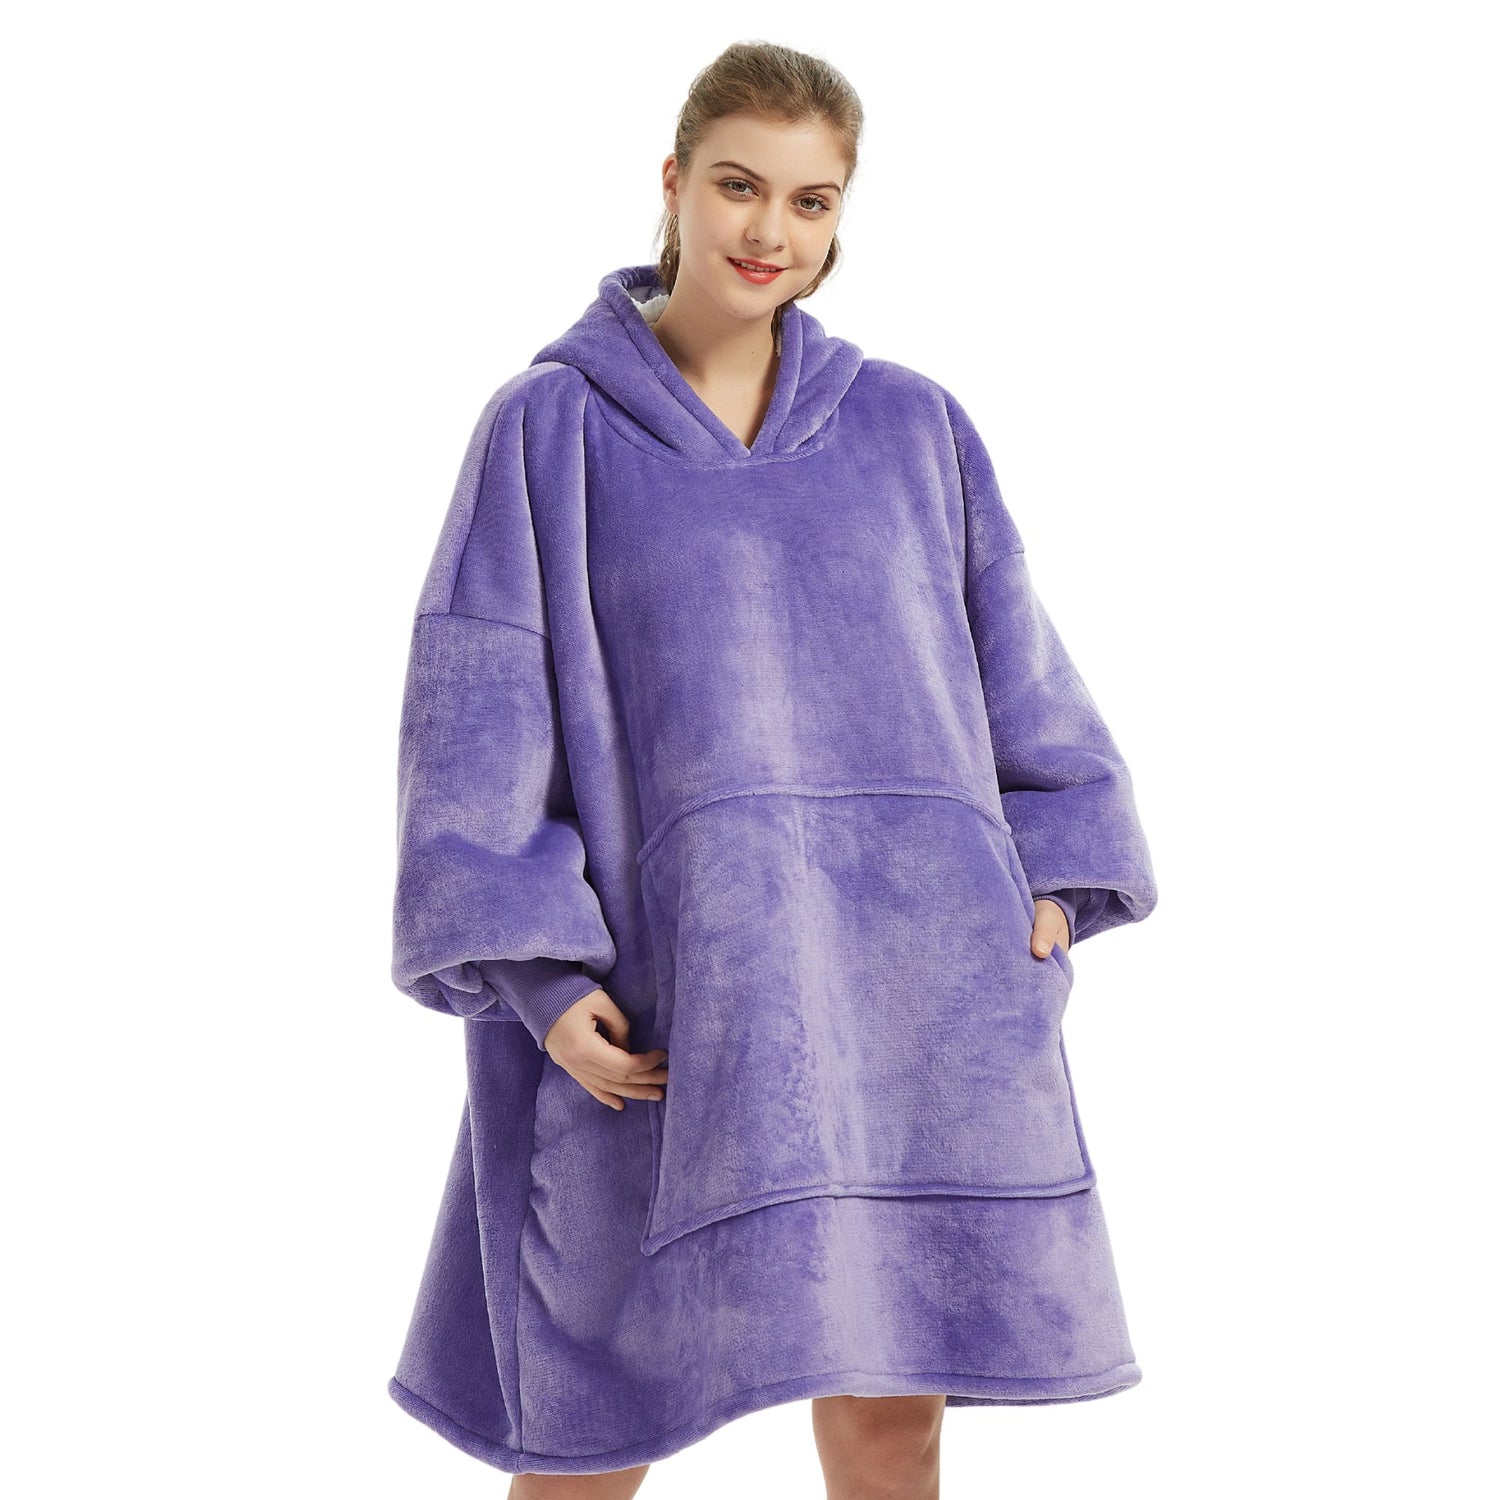 The Oversized Hoodie® woman best quality in the world purple 